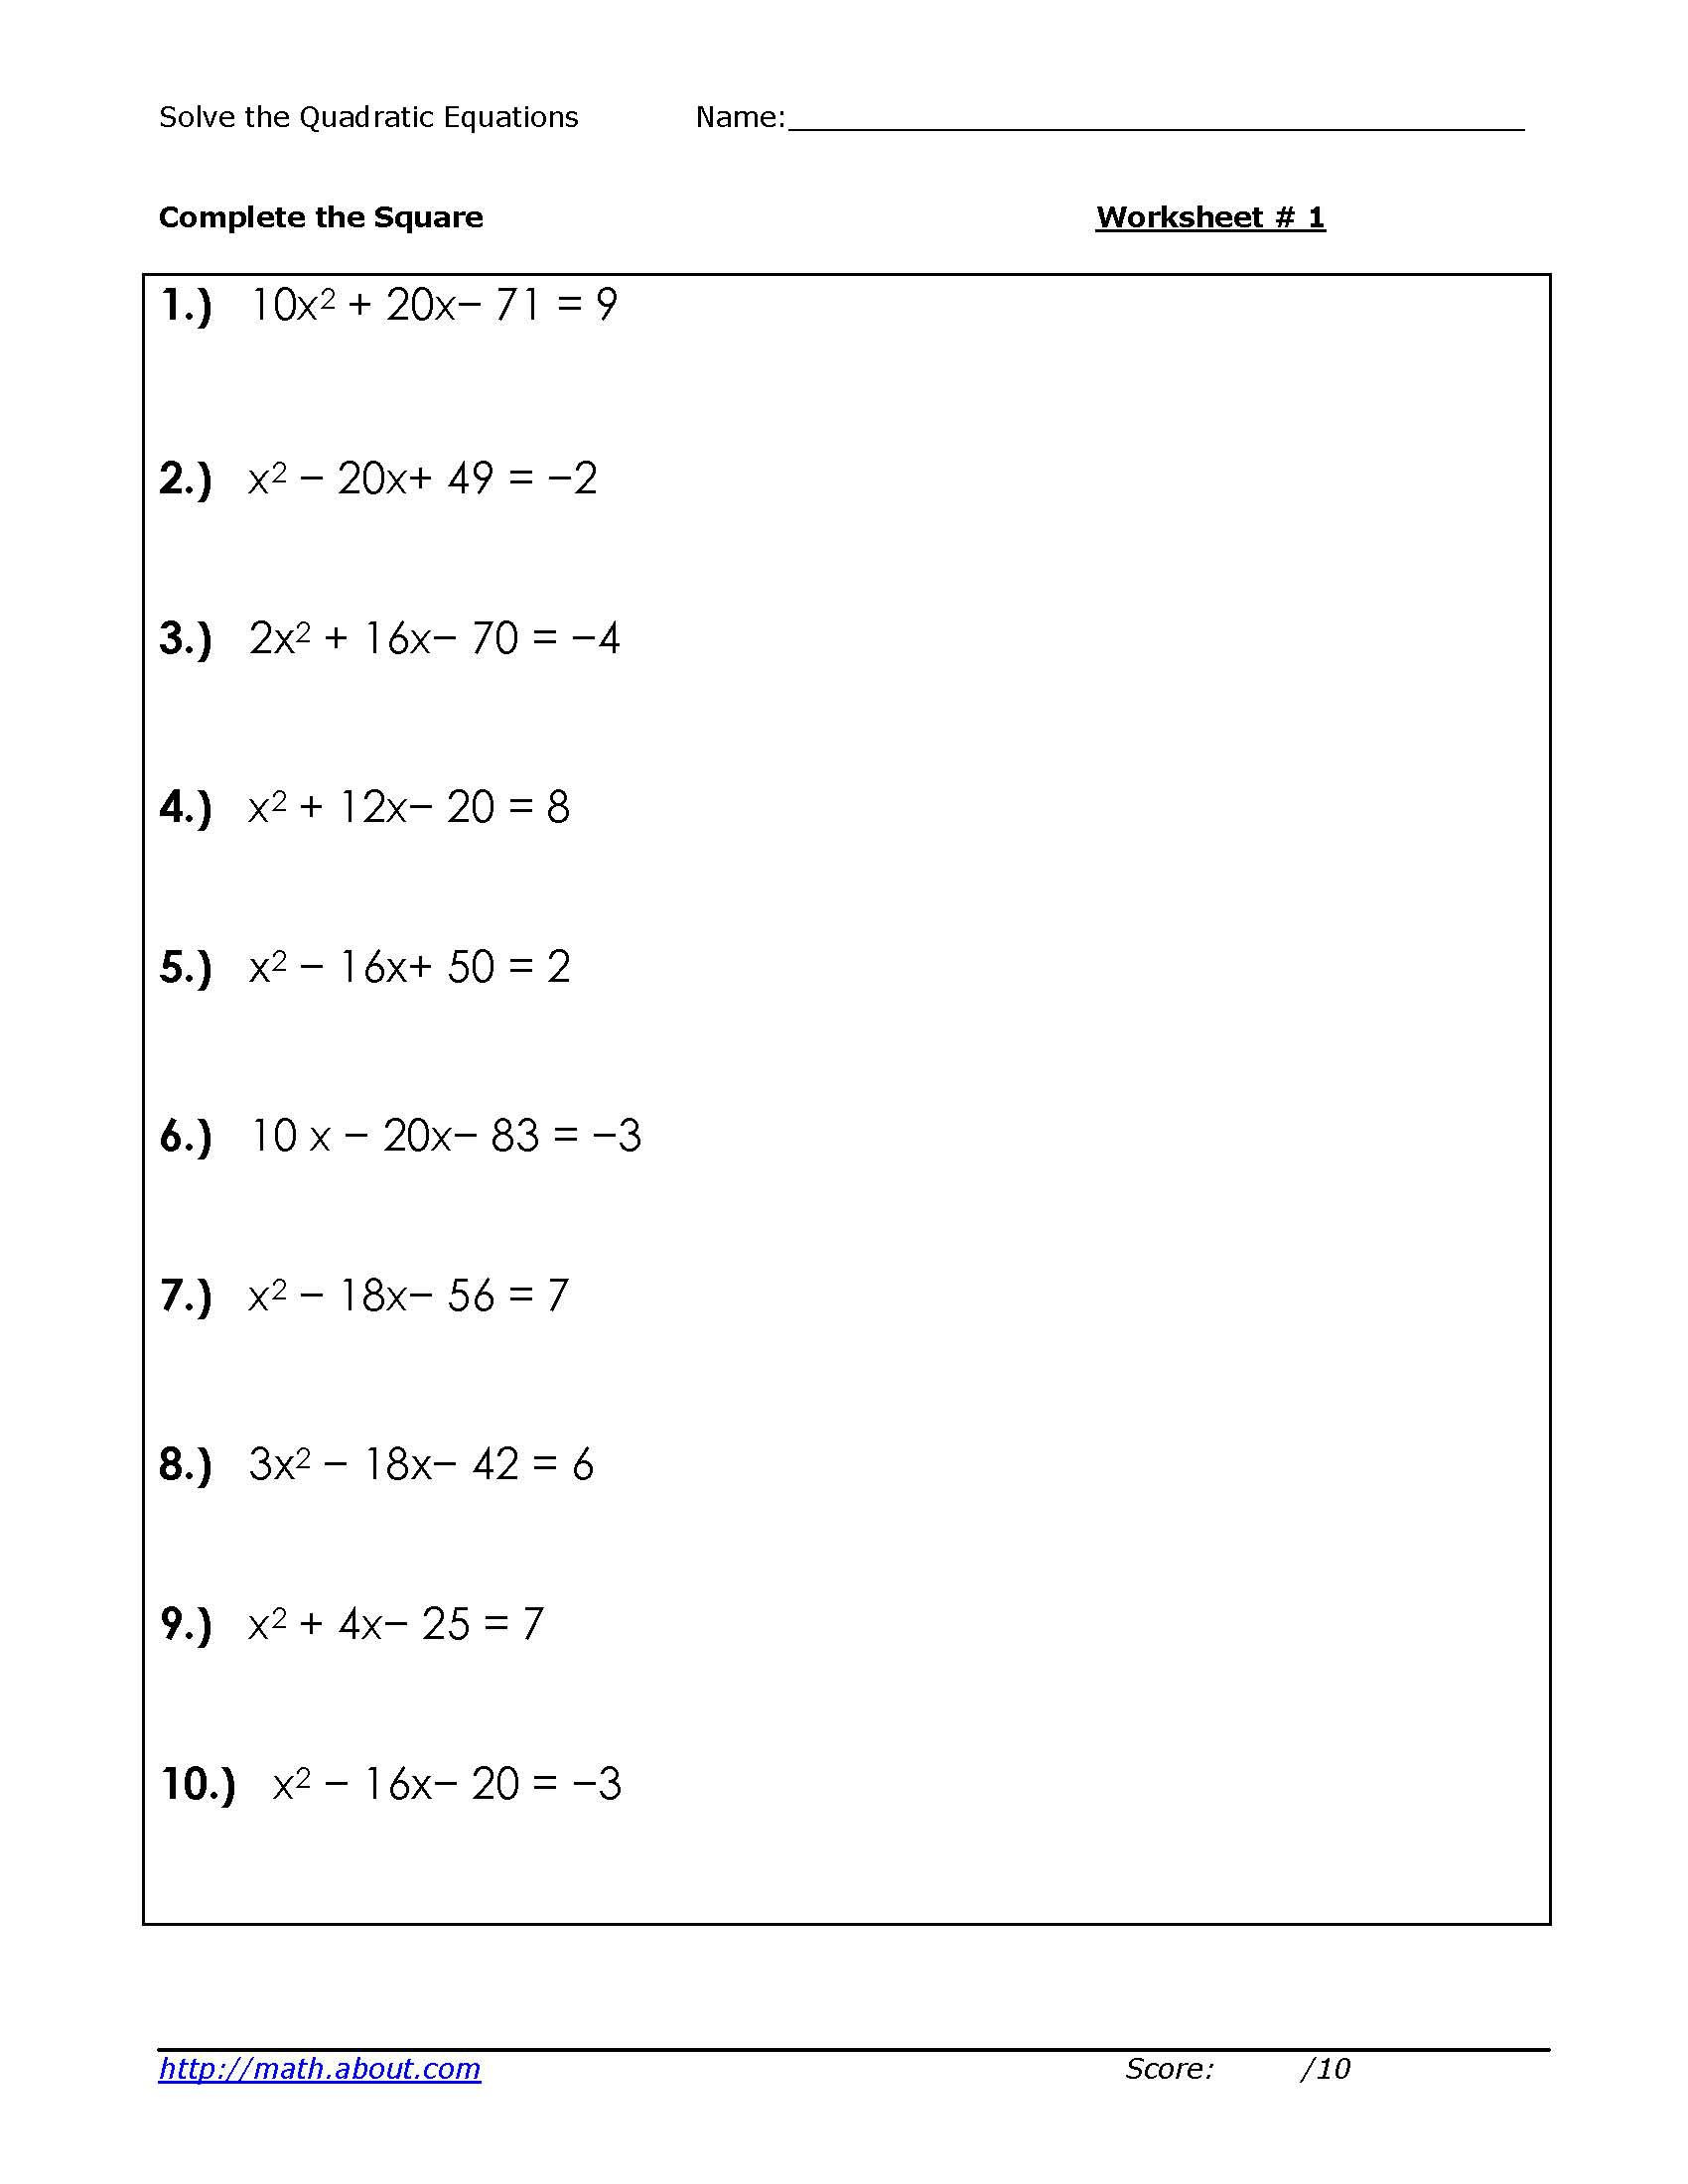 Complete the Square Worksheet solve Quadratic Equations by Peting the Square Worksheets